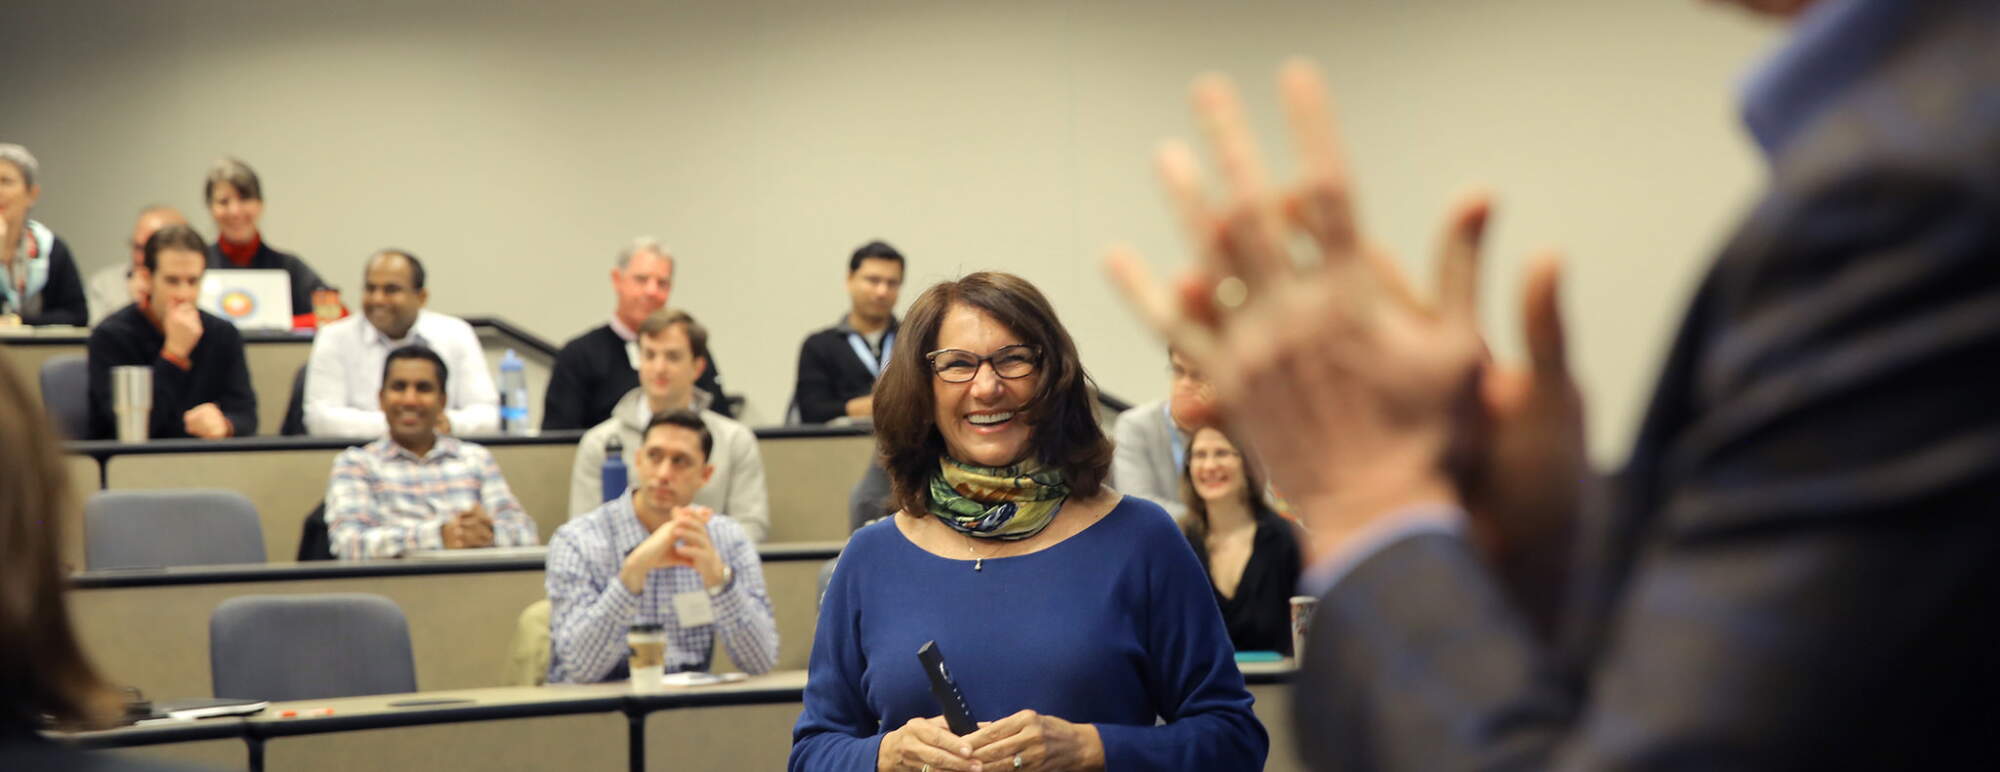 Woman laughing at a man gesturing, full classroom behind her